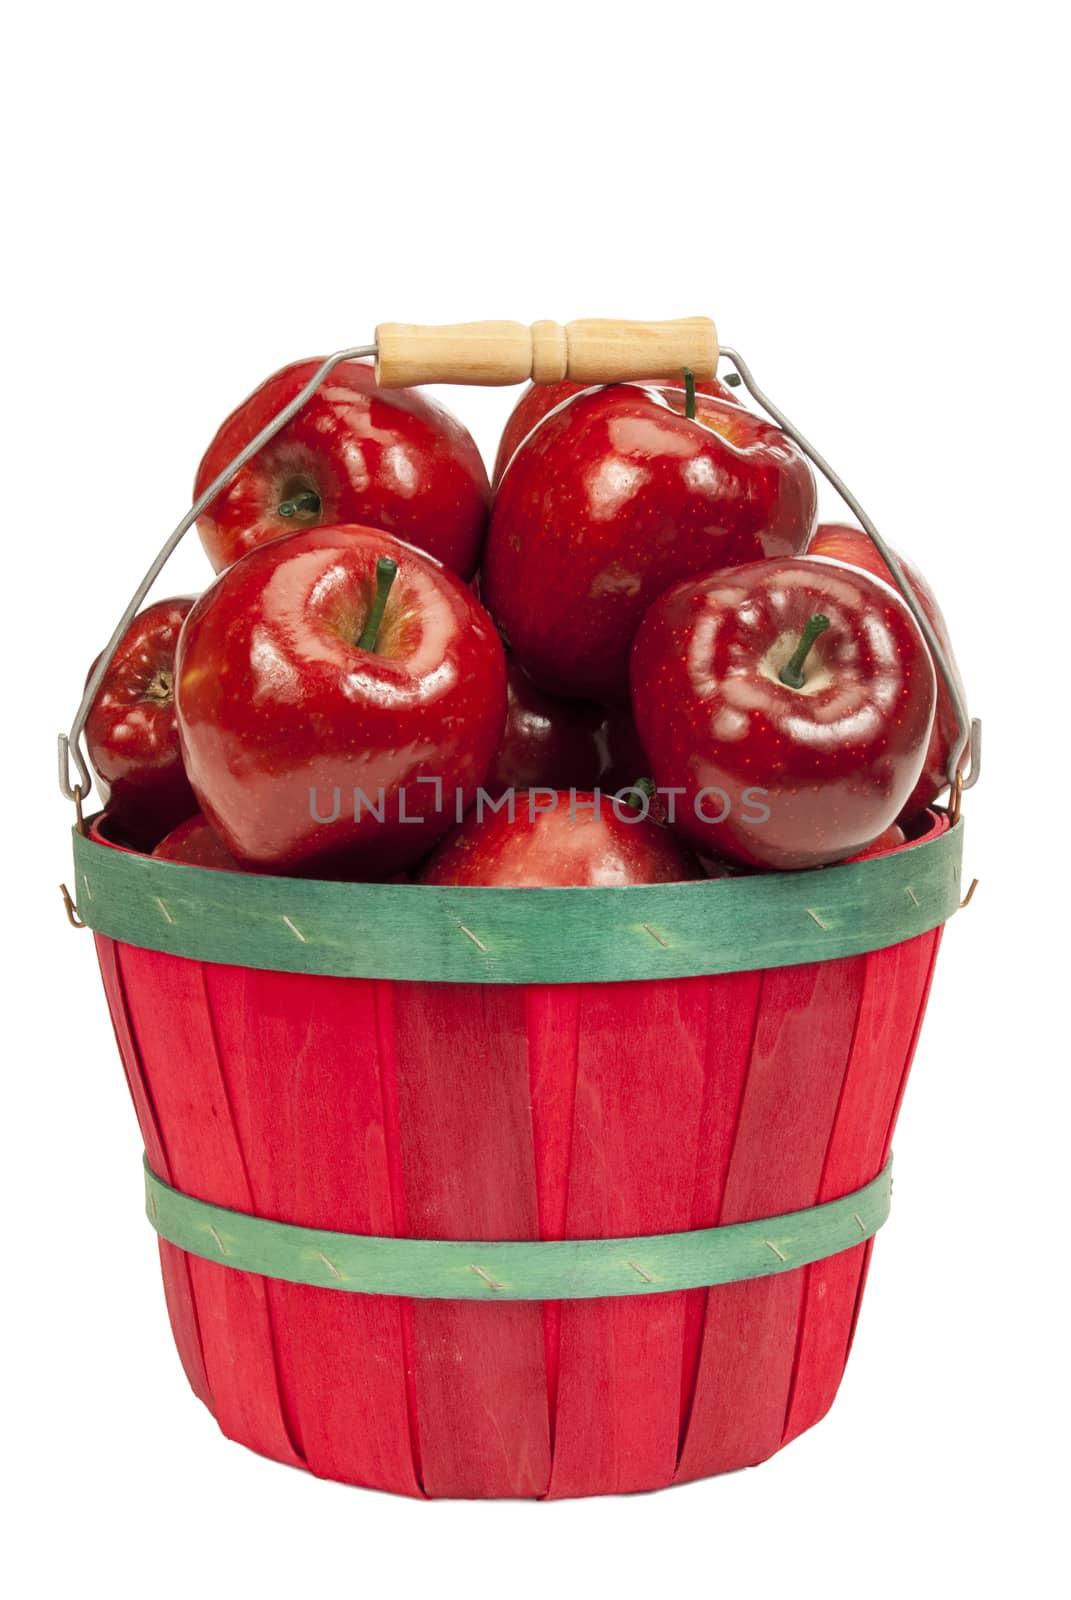 Little Basket Of Red Delicious Apples Isolated by stockbuster1